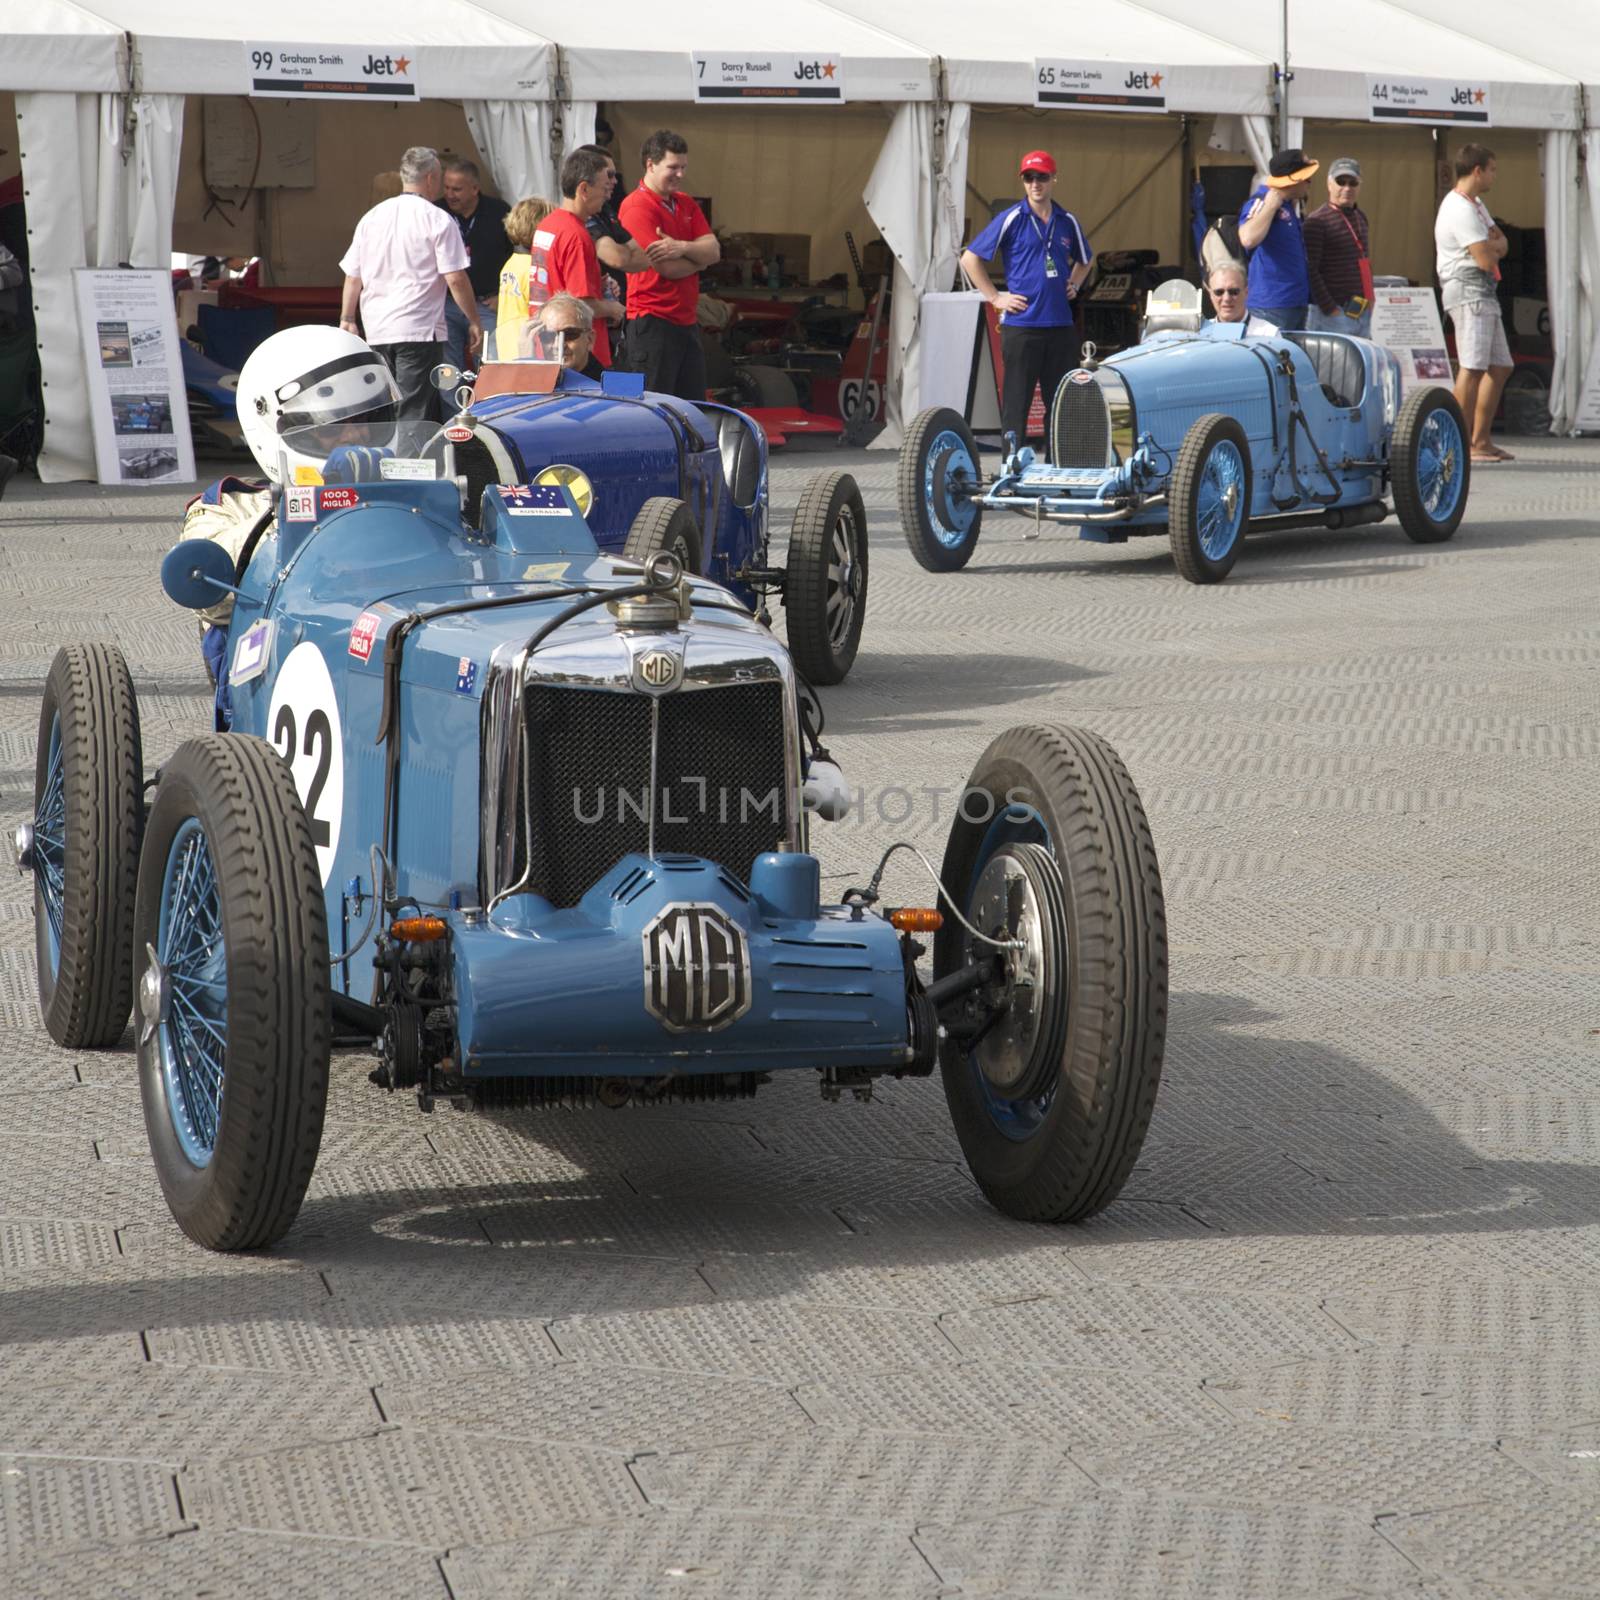 Melbourne Formula One, MG and other antique racers in 2010 by instinia